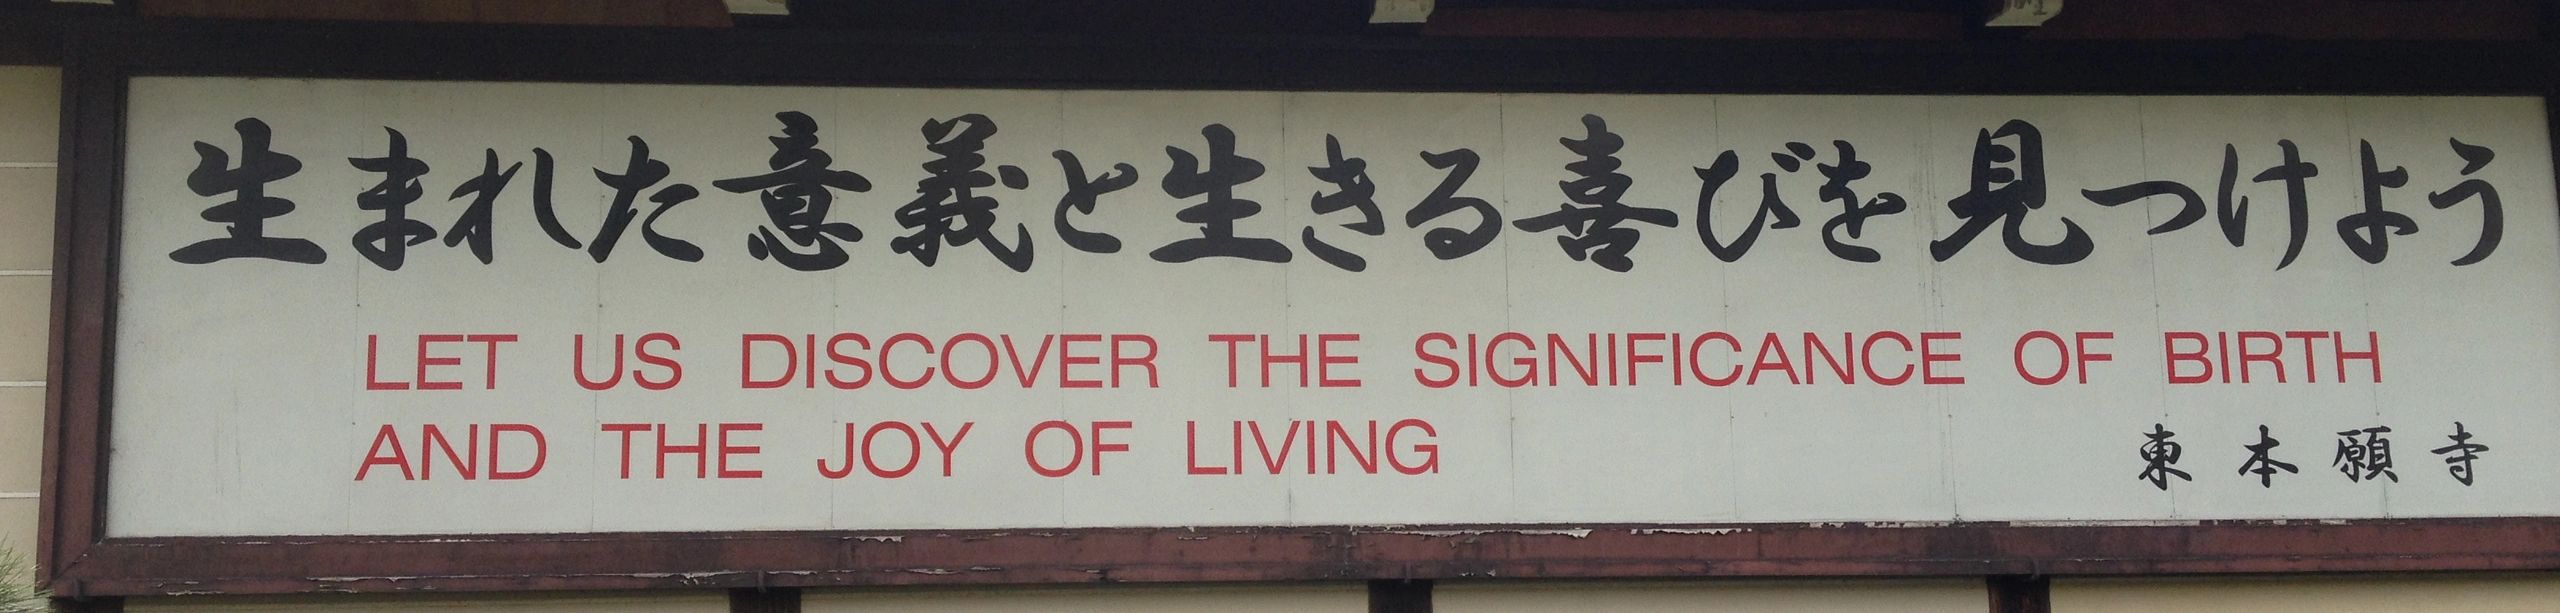 An inspiring quote outside of Higashi Hongan Temple in Kyoto